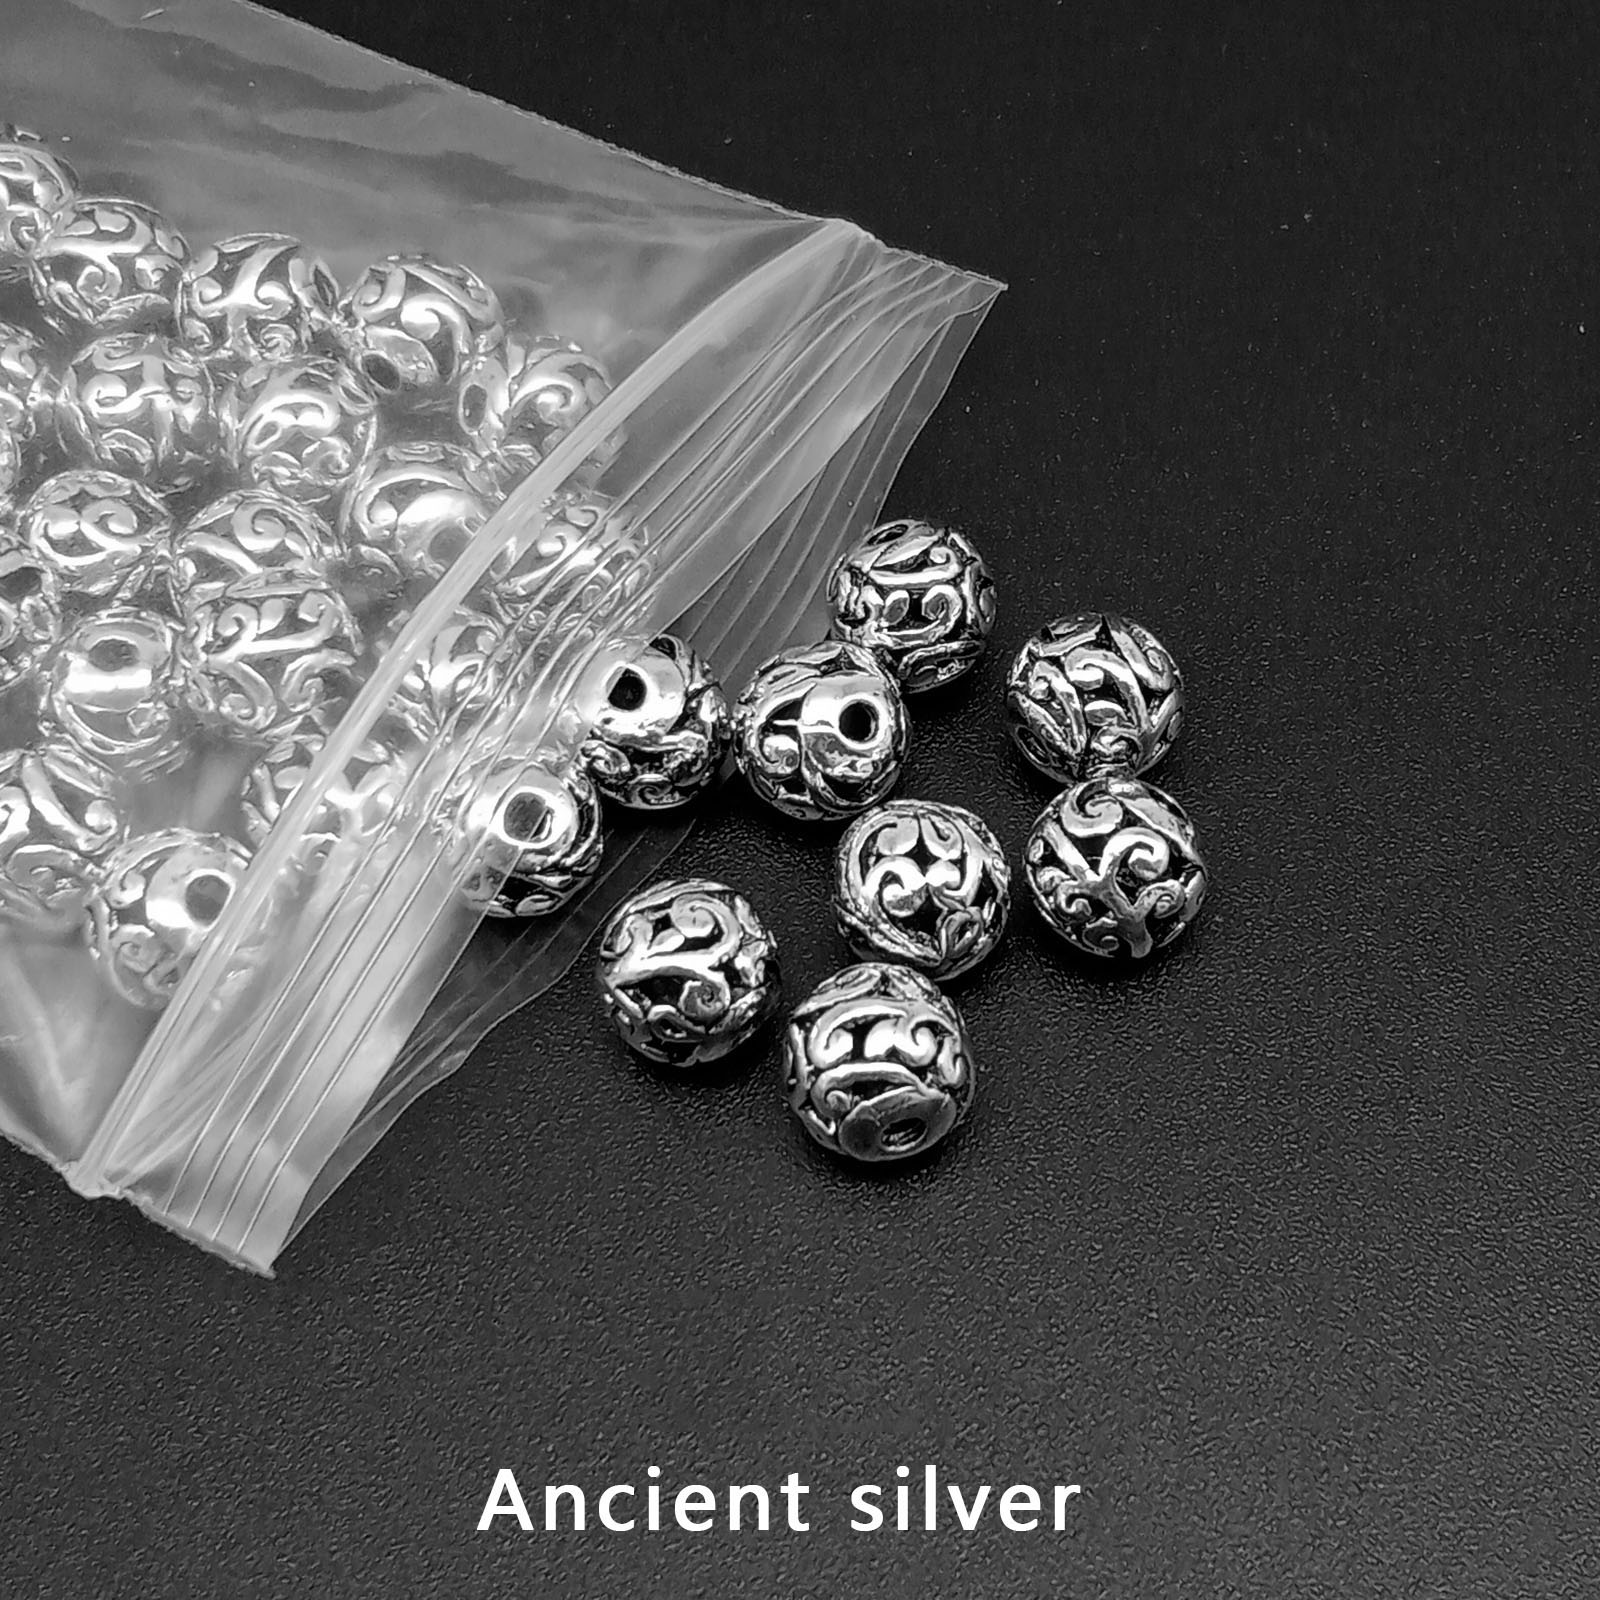 Ancient Silver